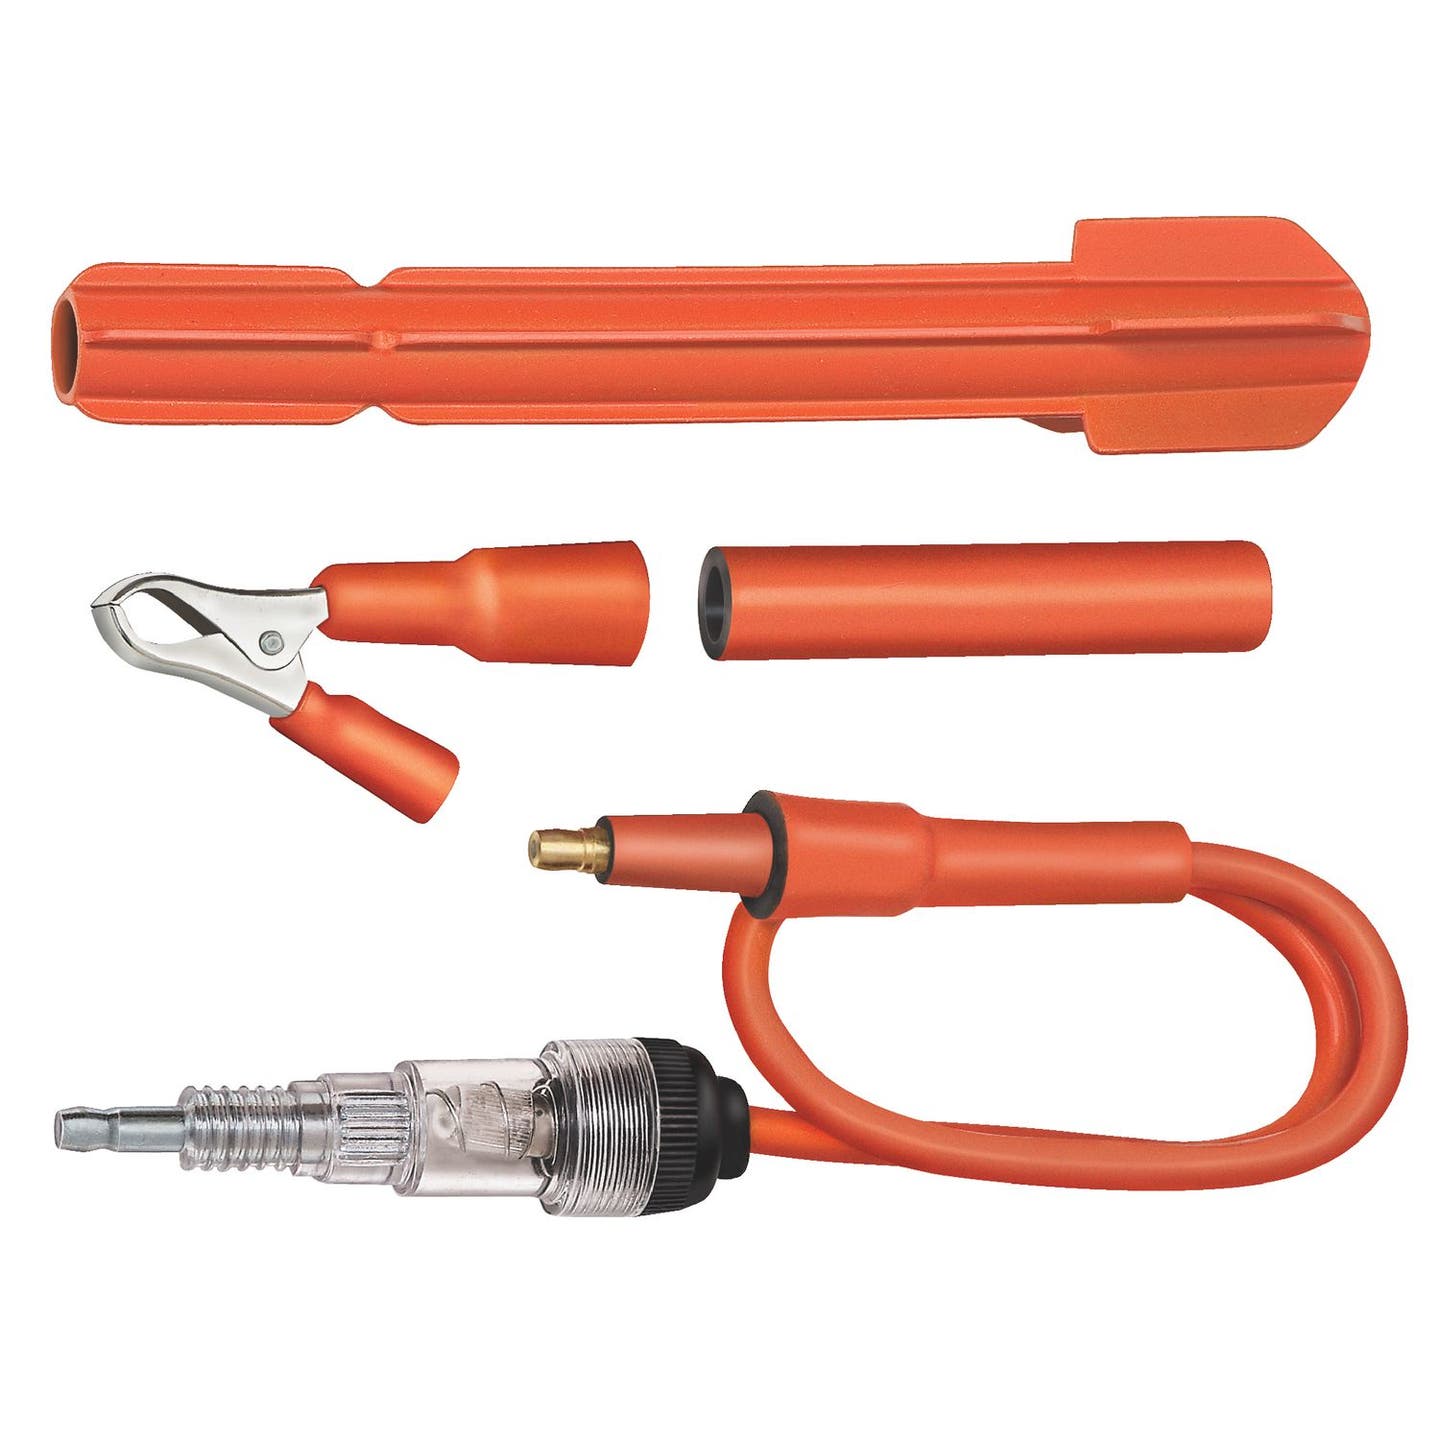 IN-LINE SPARK CHECKER KIT FOR RECESSED PLUGS